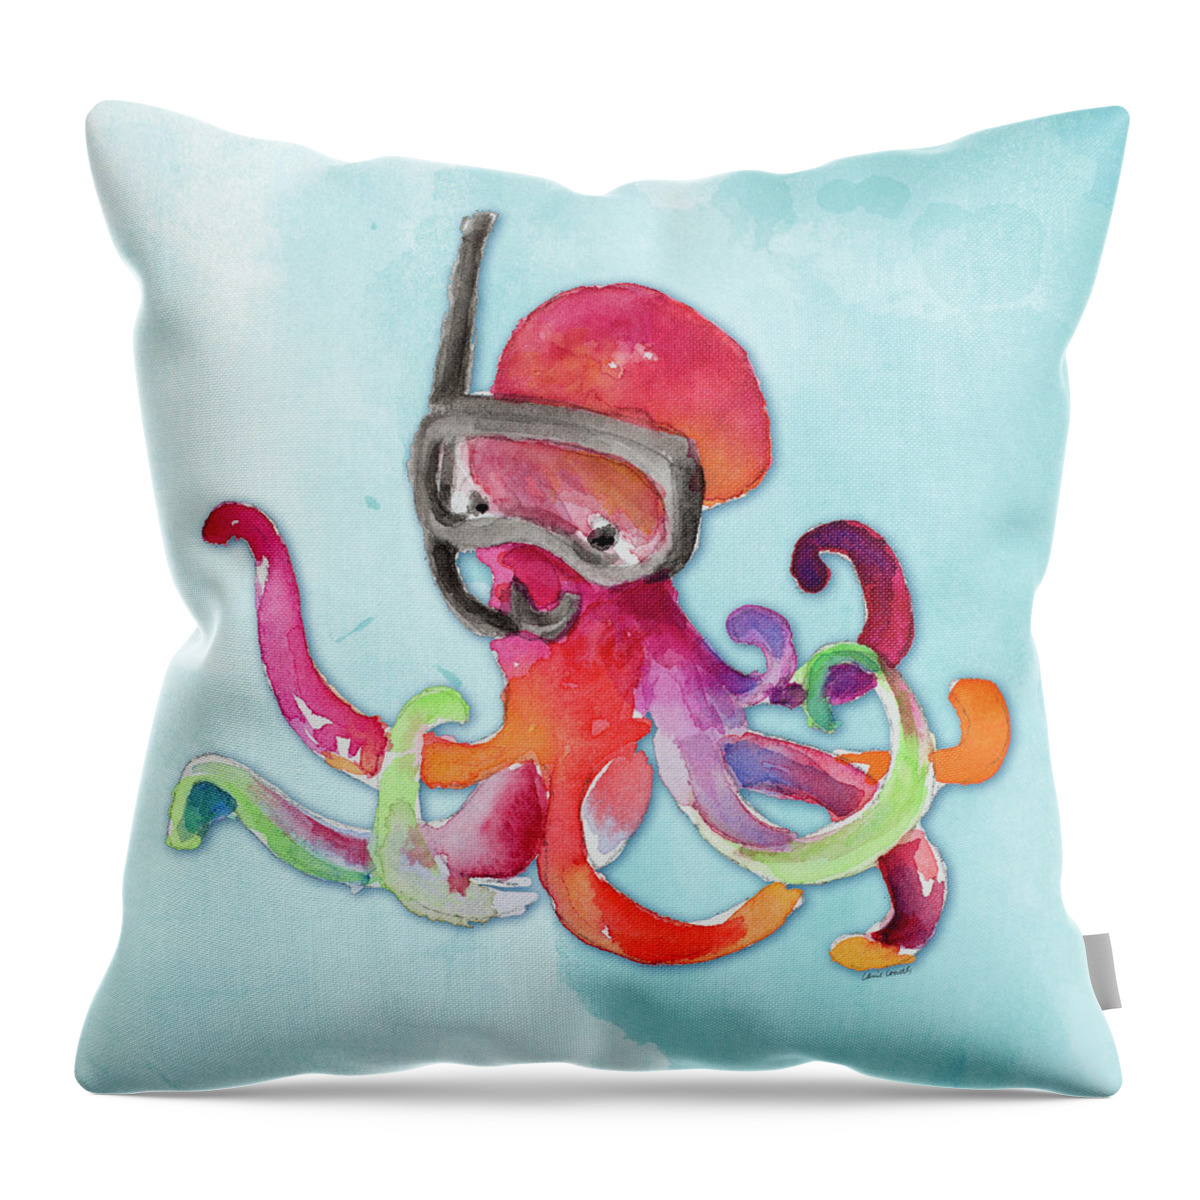 Snorkeling Throw Pillow featuring the painting Snorkeling Octopus On Watercolor by Lanie Loreth